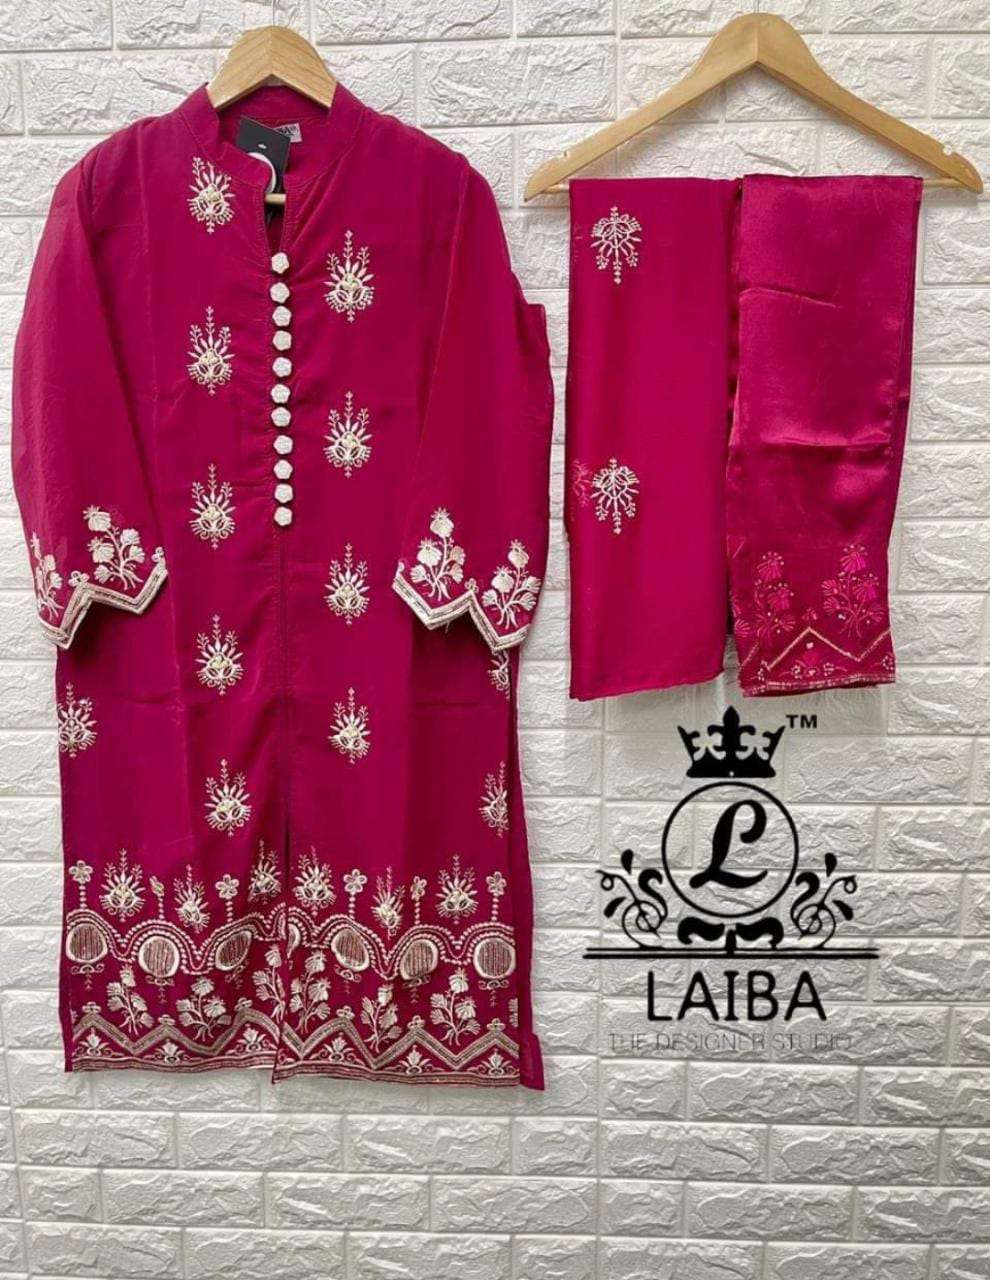  Laiba The Designer Studio Am Vol-129 Readymade Collection On Wholesale